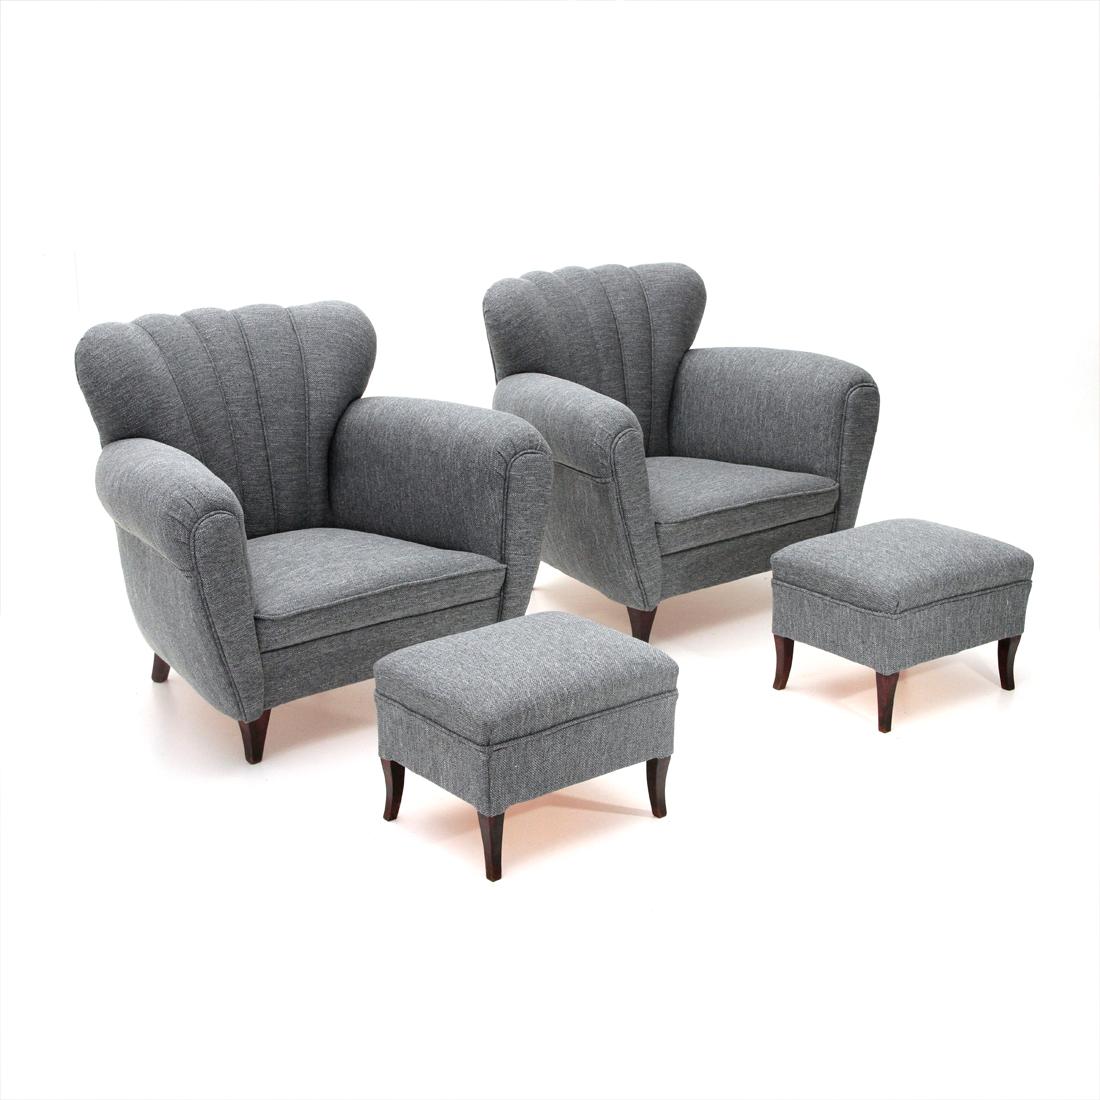 Pair of armchairs with pouf, Italian manufacture of the 1950s.
Wooden structure padded and lined with new gray fabric.
Wooden legs.
Good general conditions, some signs due to normal use over time in the wooden part.

Armchairs dimensions: Width